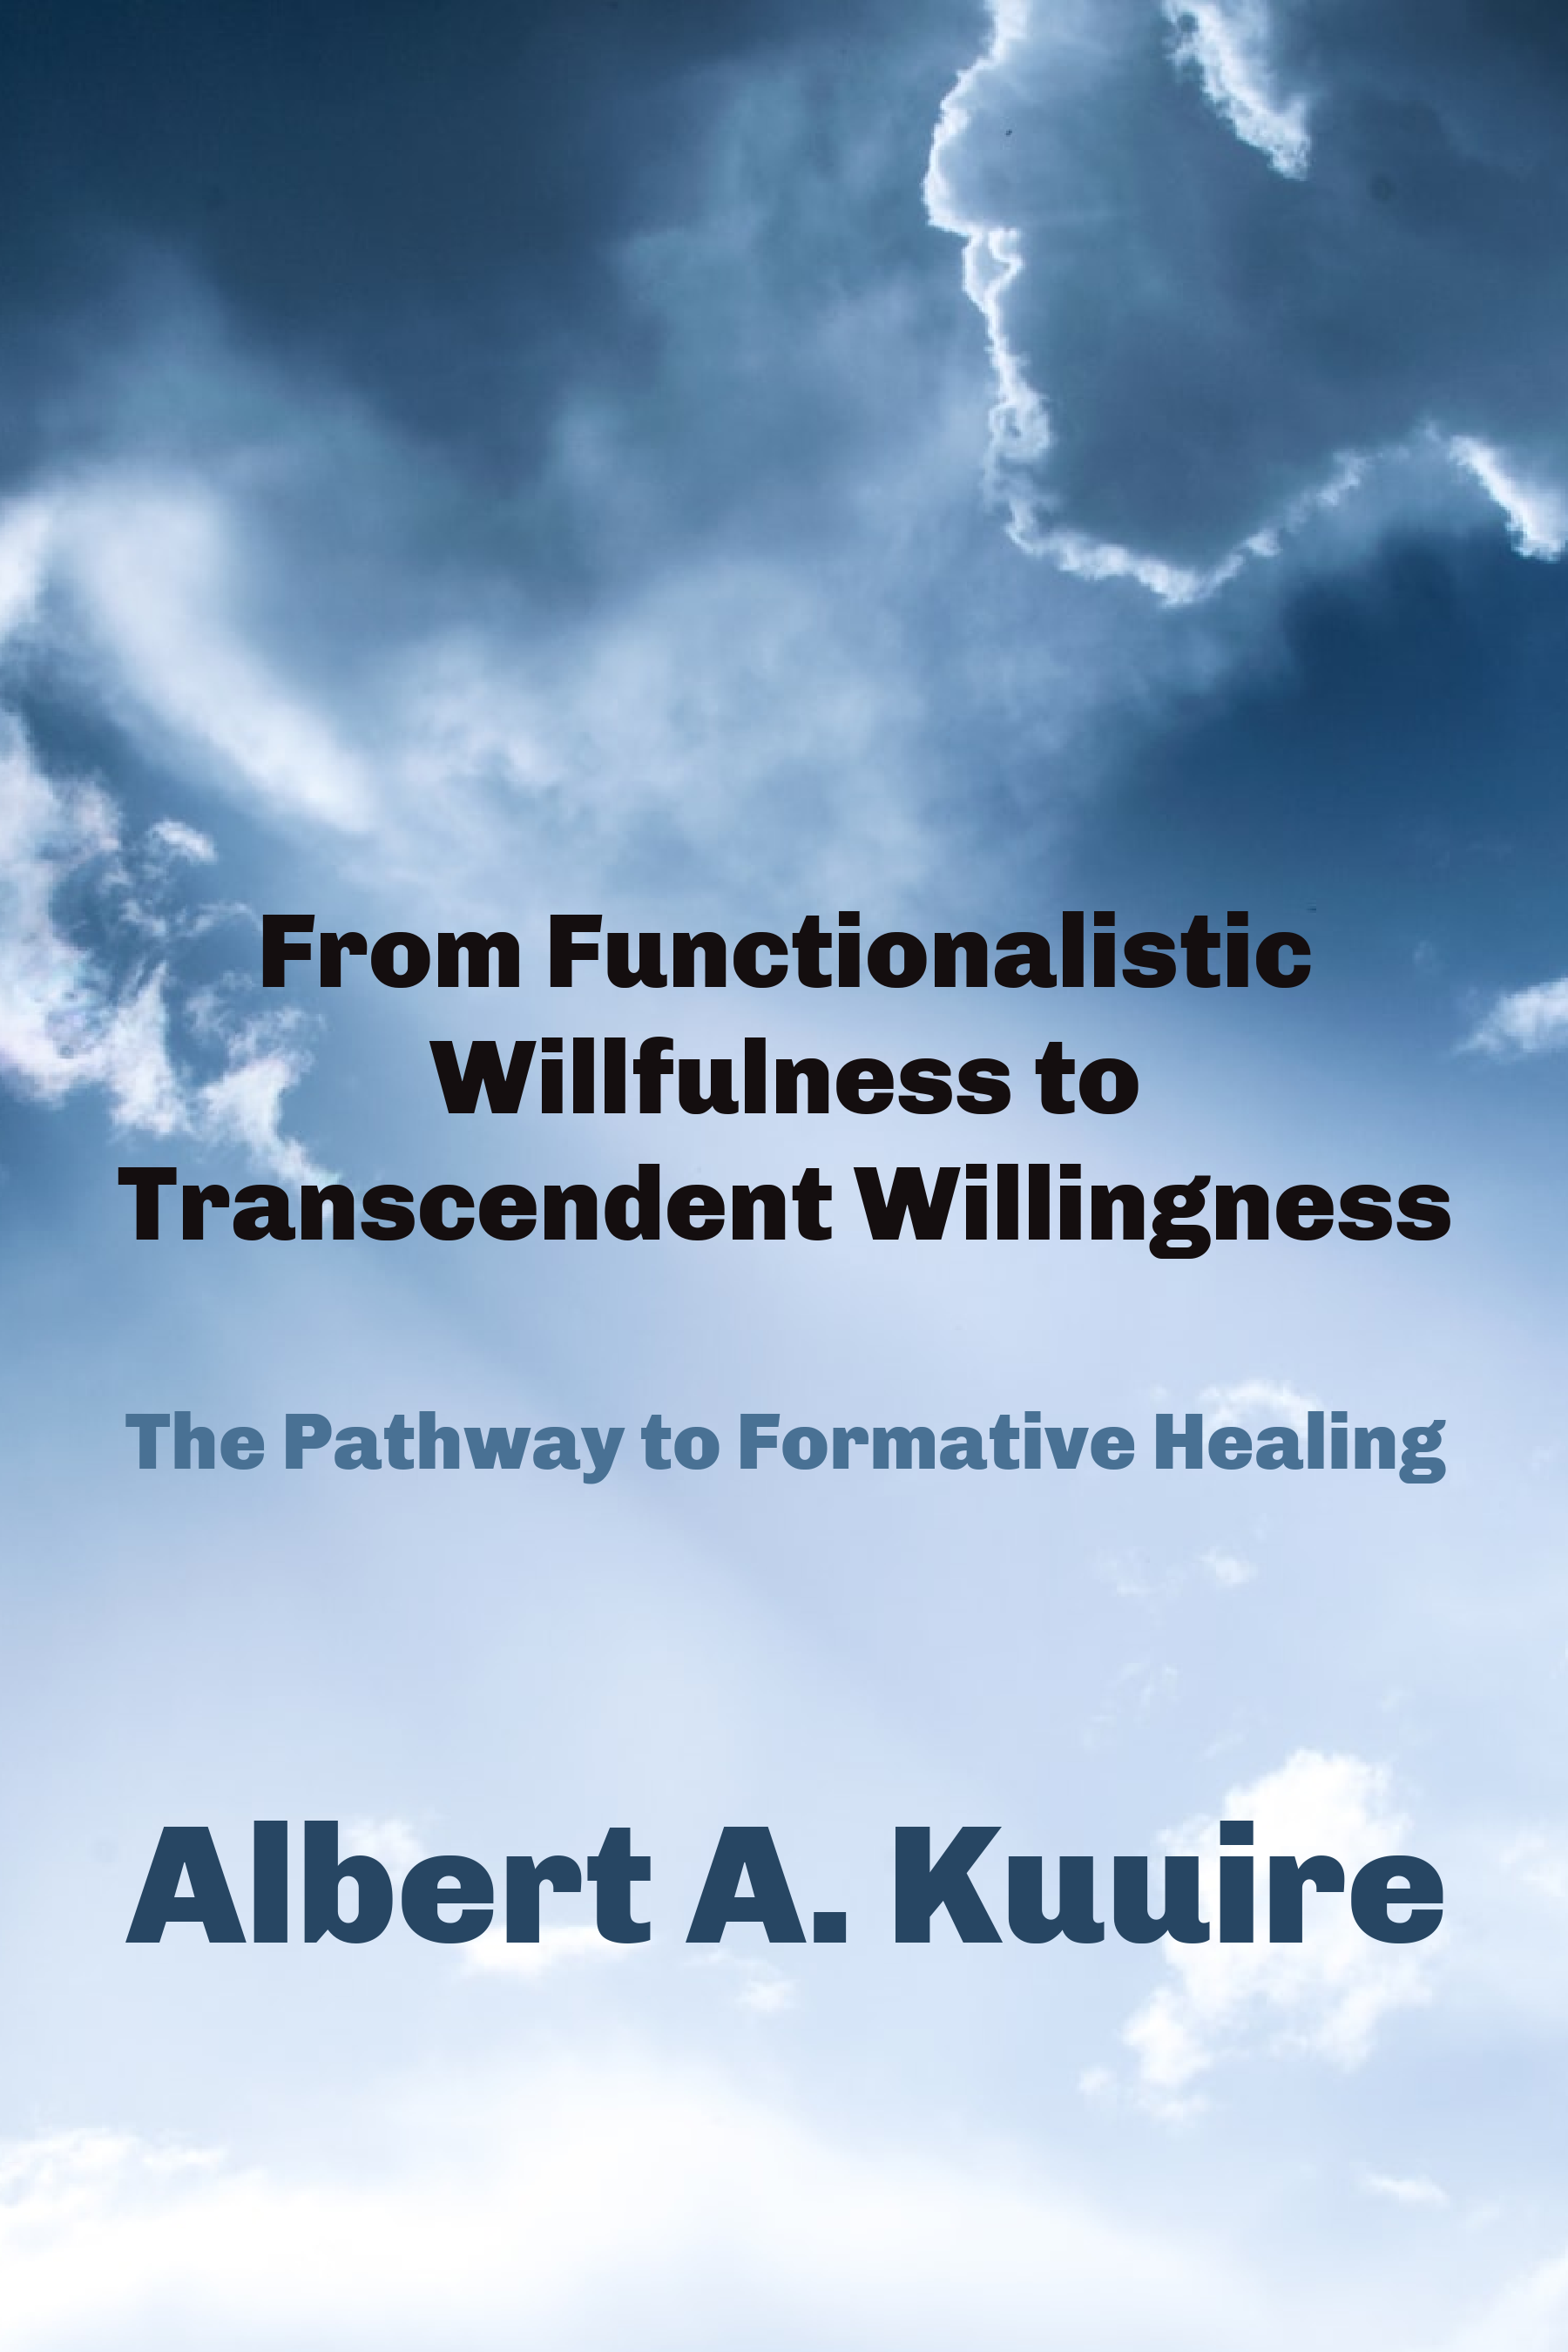 From Functionalistic Willfulness to Transcendent Willingness by Msgr. Albert Kuuire